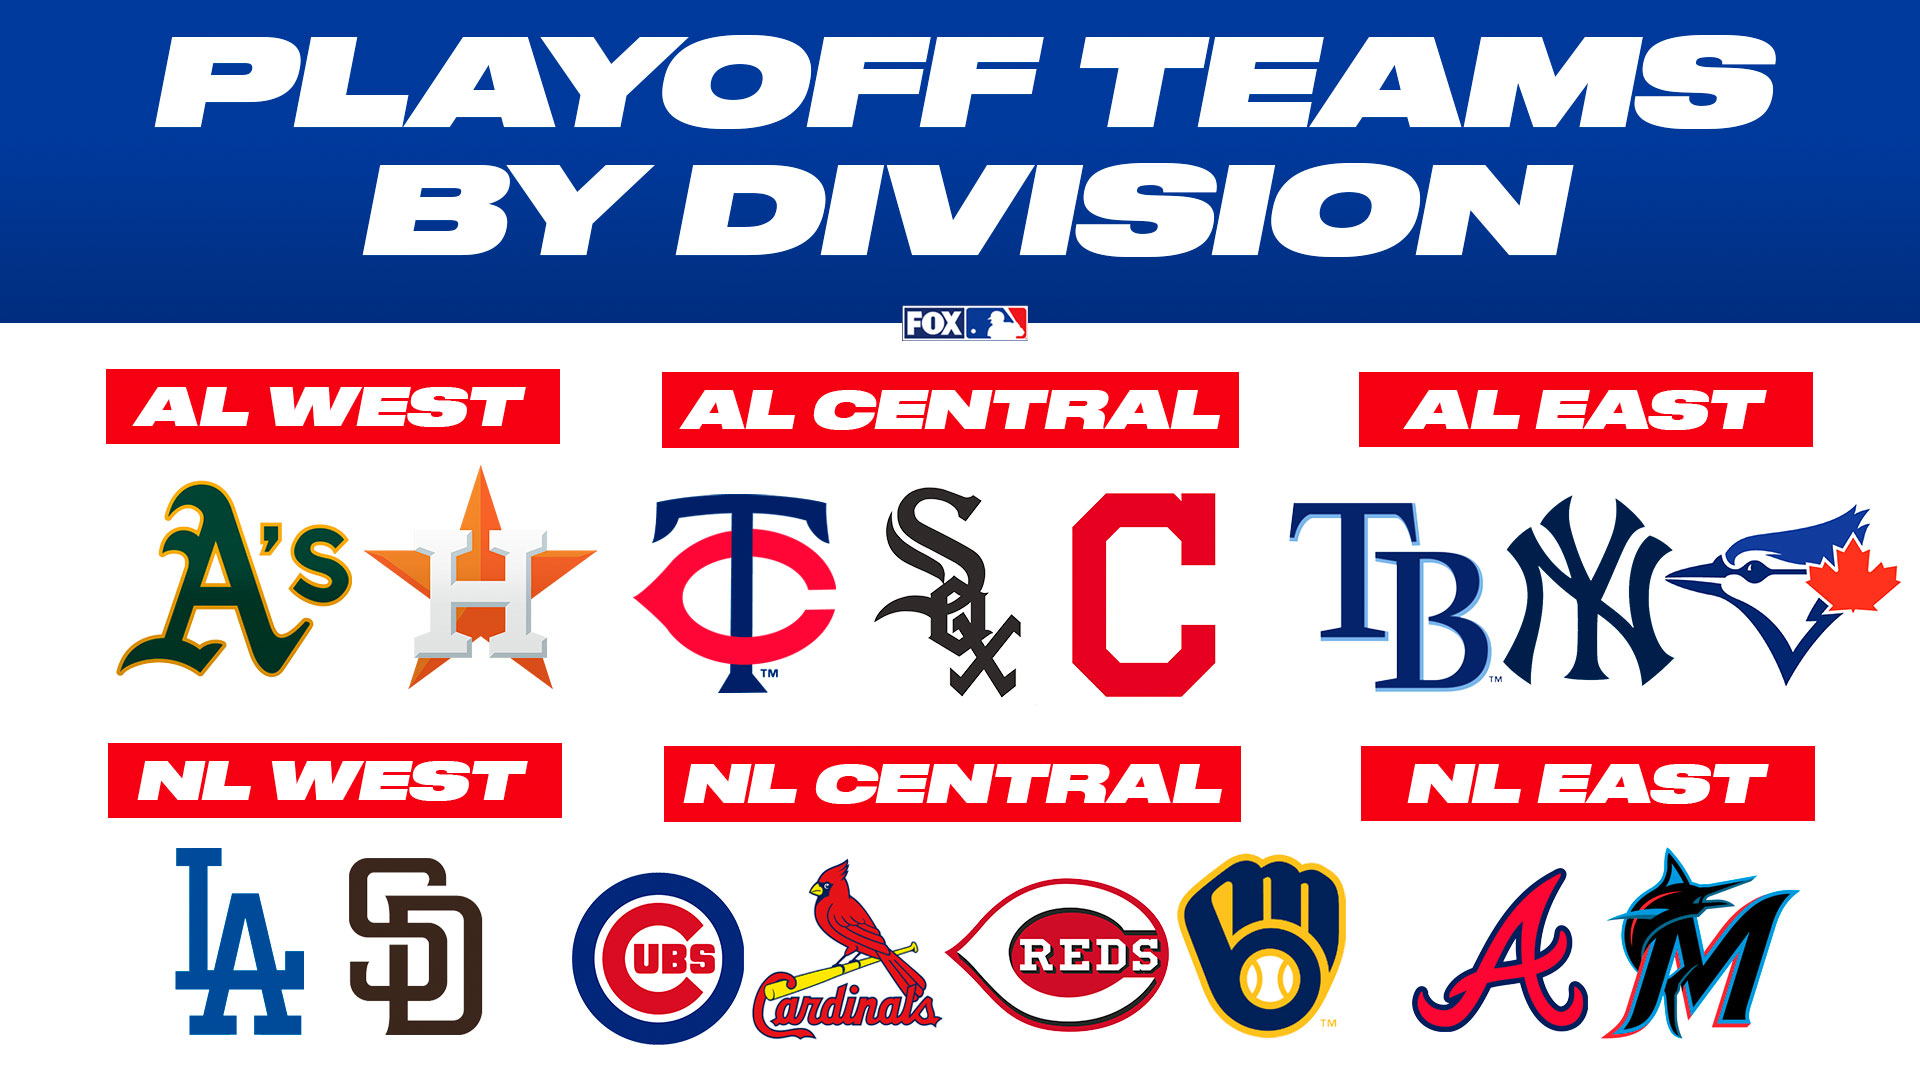 FOX Sports: MLB on X: A breakdown of playoff teams by division